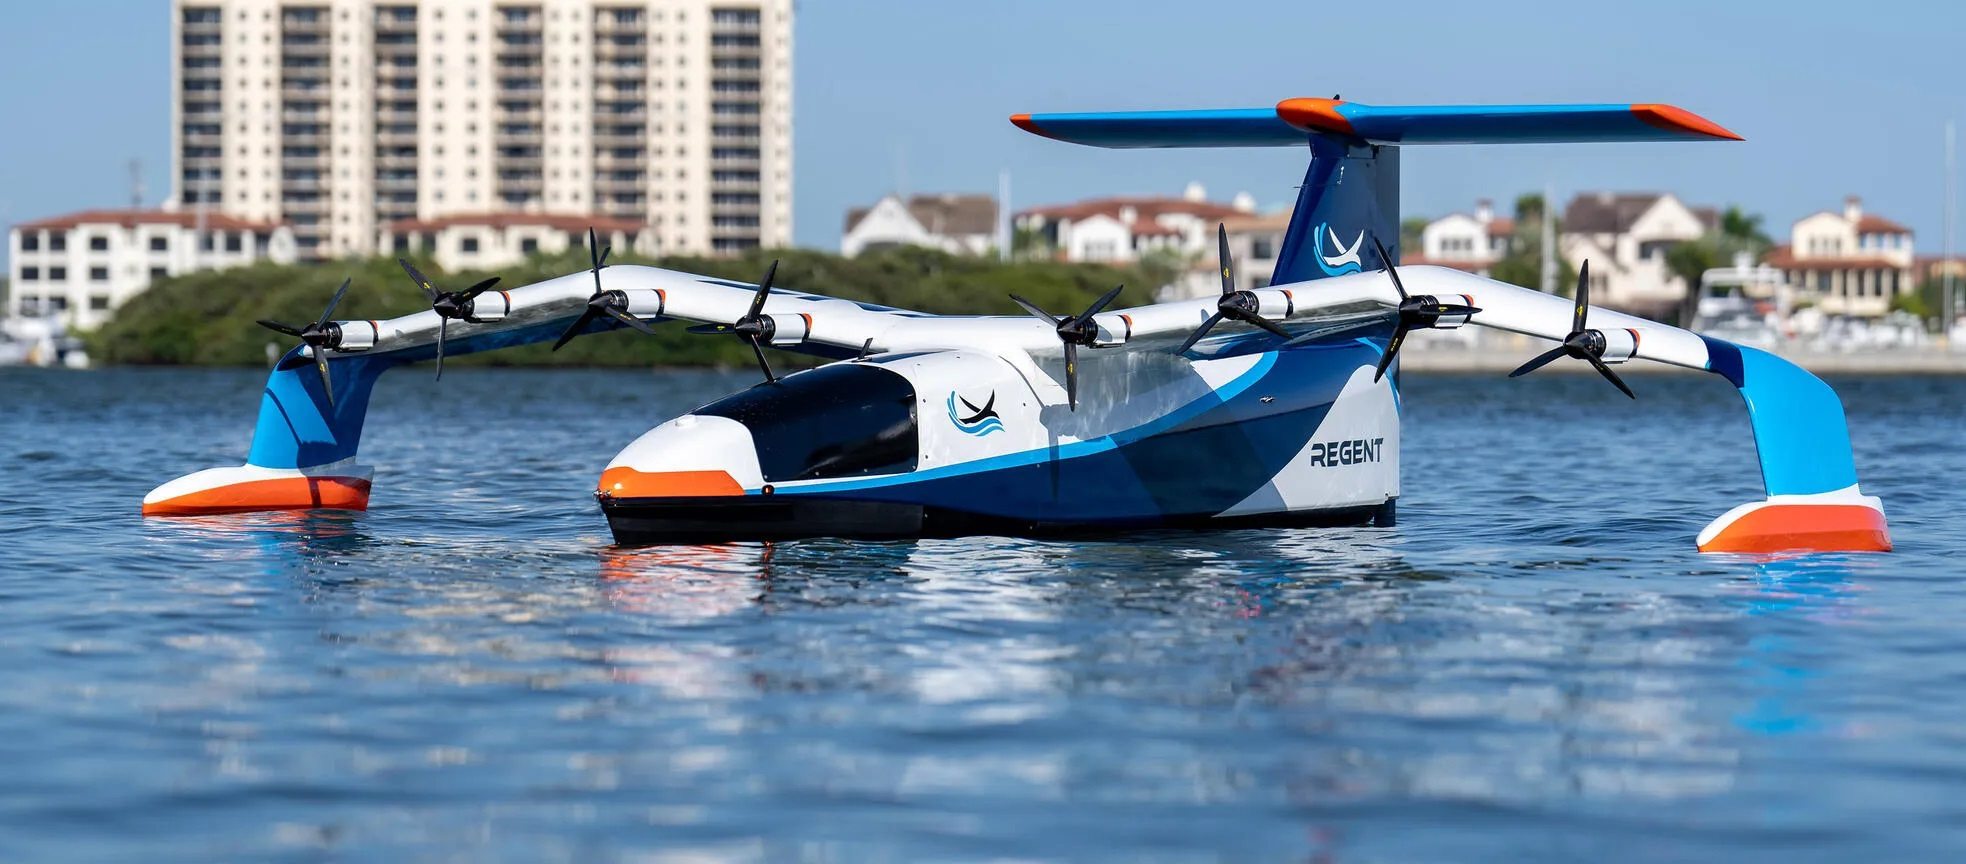 regent-secures-60-million-in-funding-to-take-electric-seaglider-startup-to-new-heights